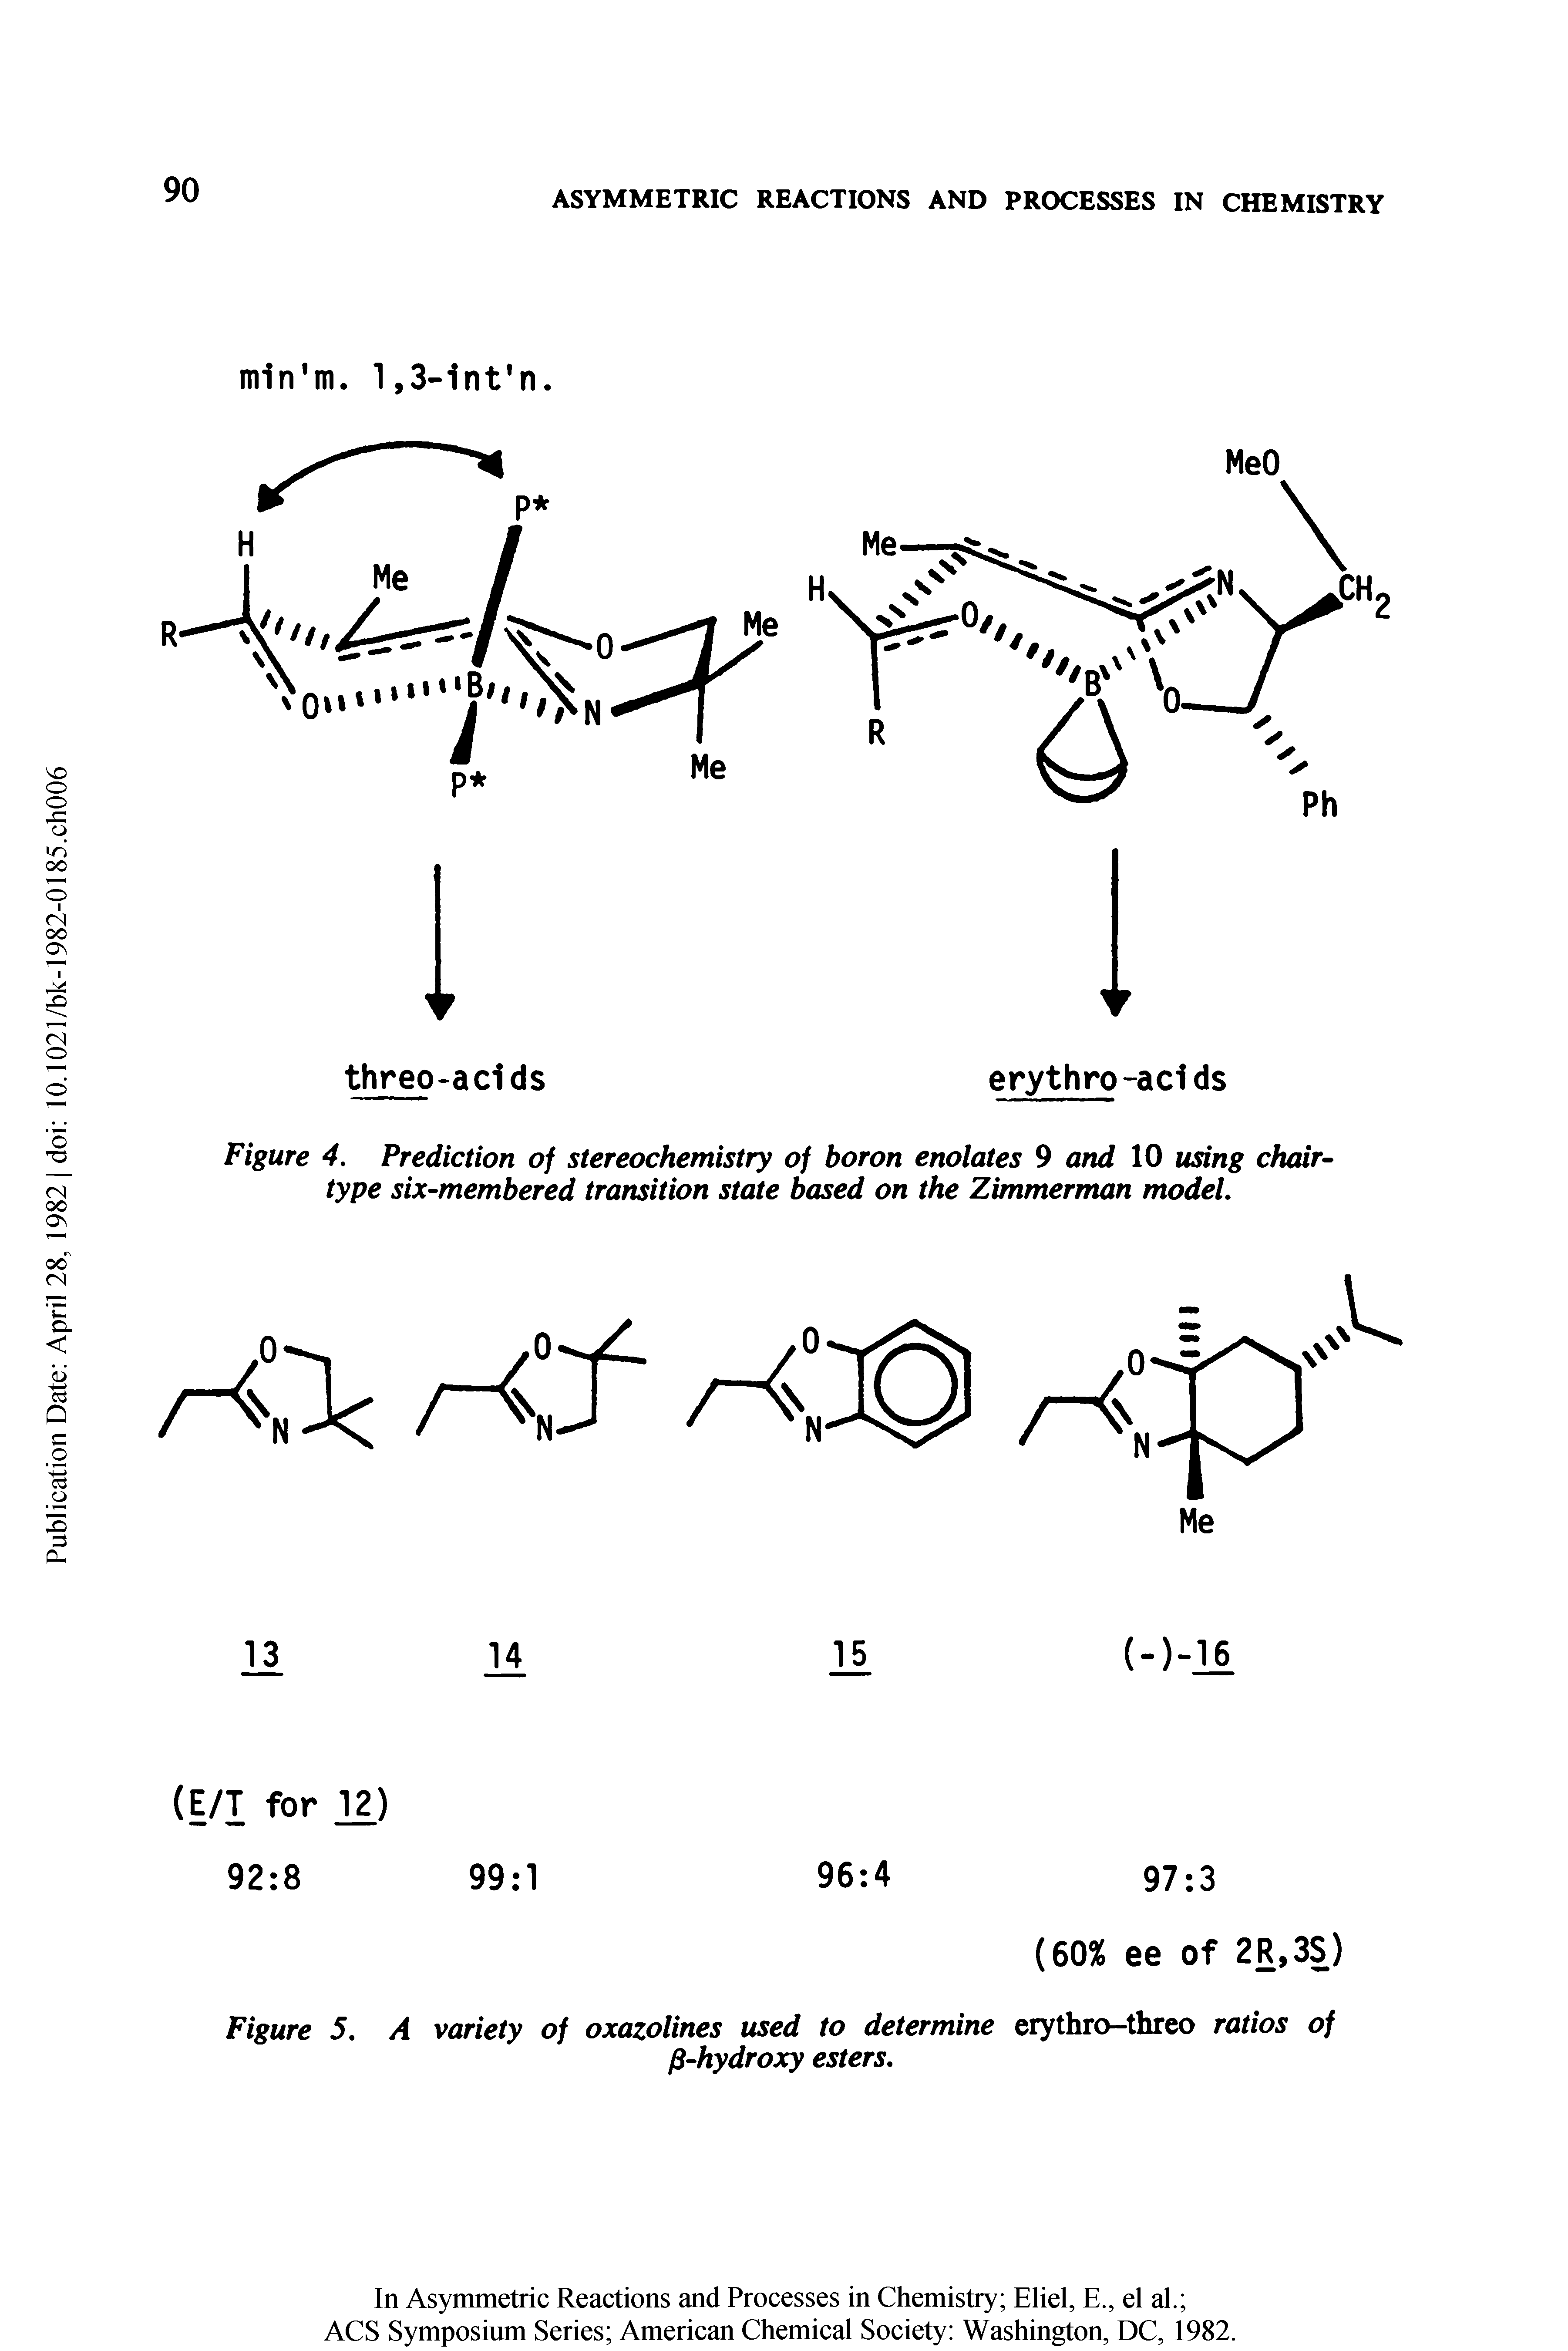 Figure 4. Prediction of stereochemistry of boron enolates 9 and 10 using chair-type six-membered transition state based on the Zimmerman model.